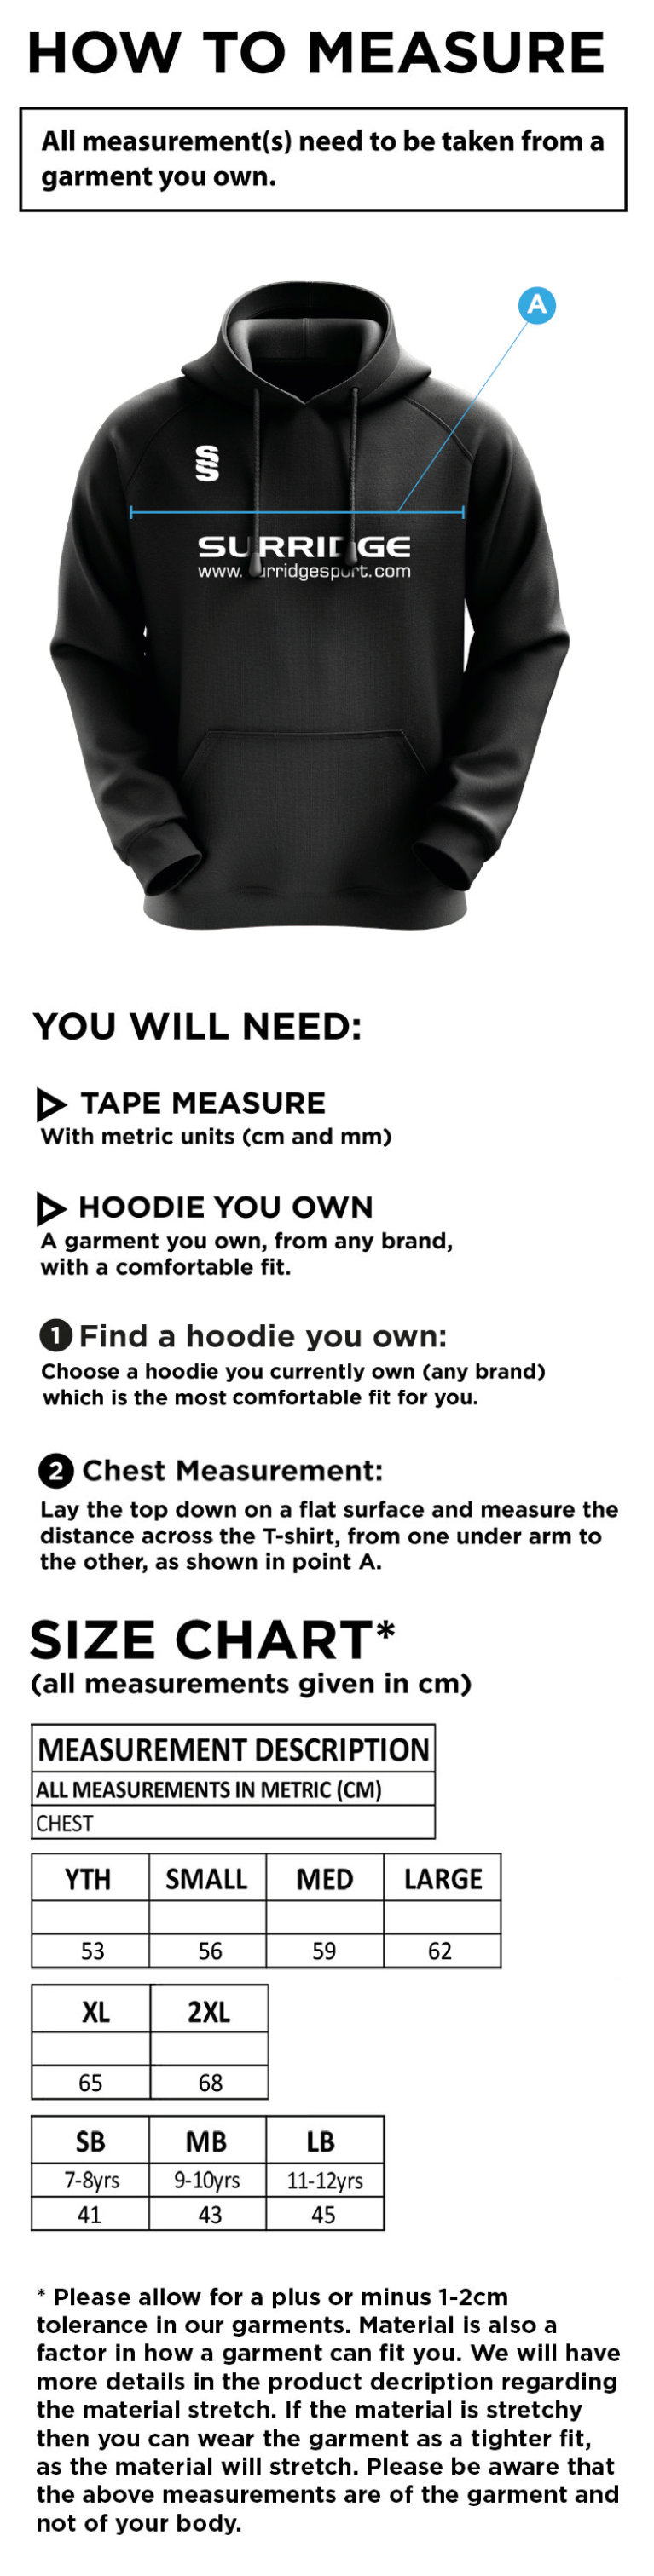 HSBC - Blade Hoody - Size Guide